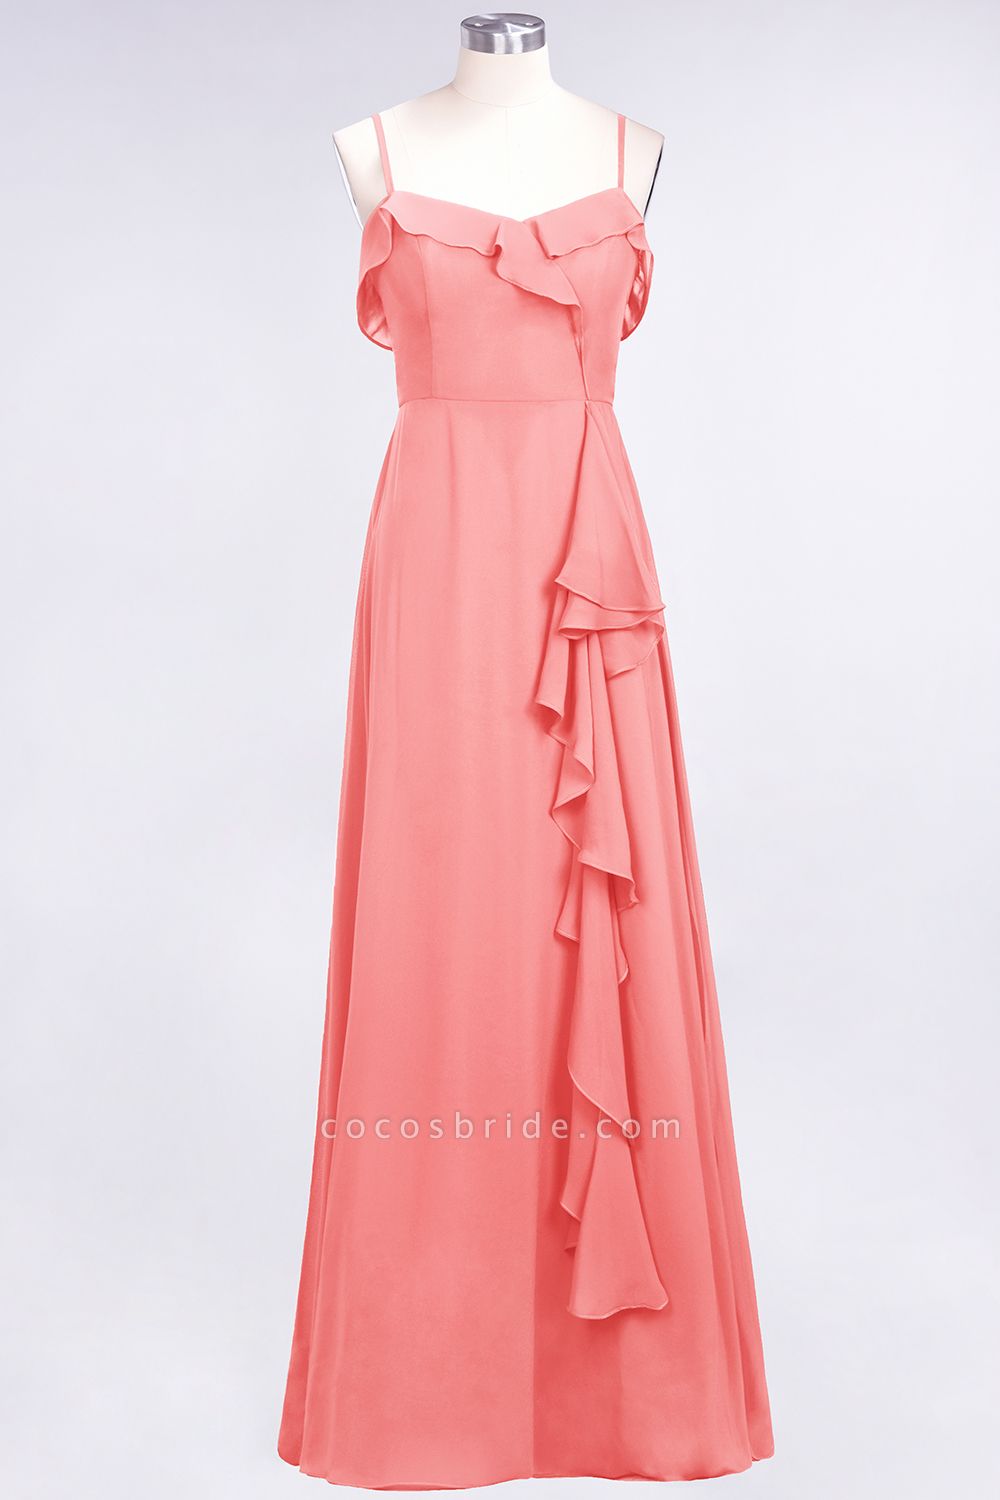 Spaghetti Straps A-Line Chiffon Backless Floor-length Prom Dress With Ruffles